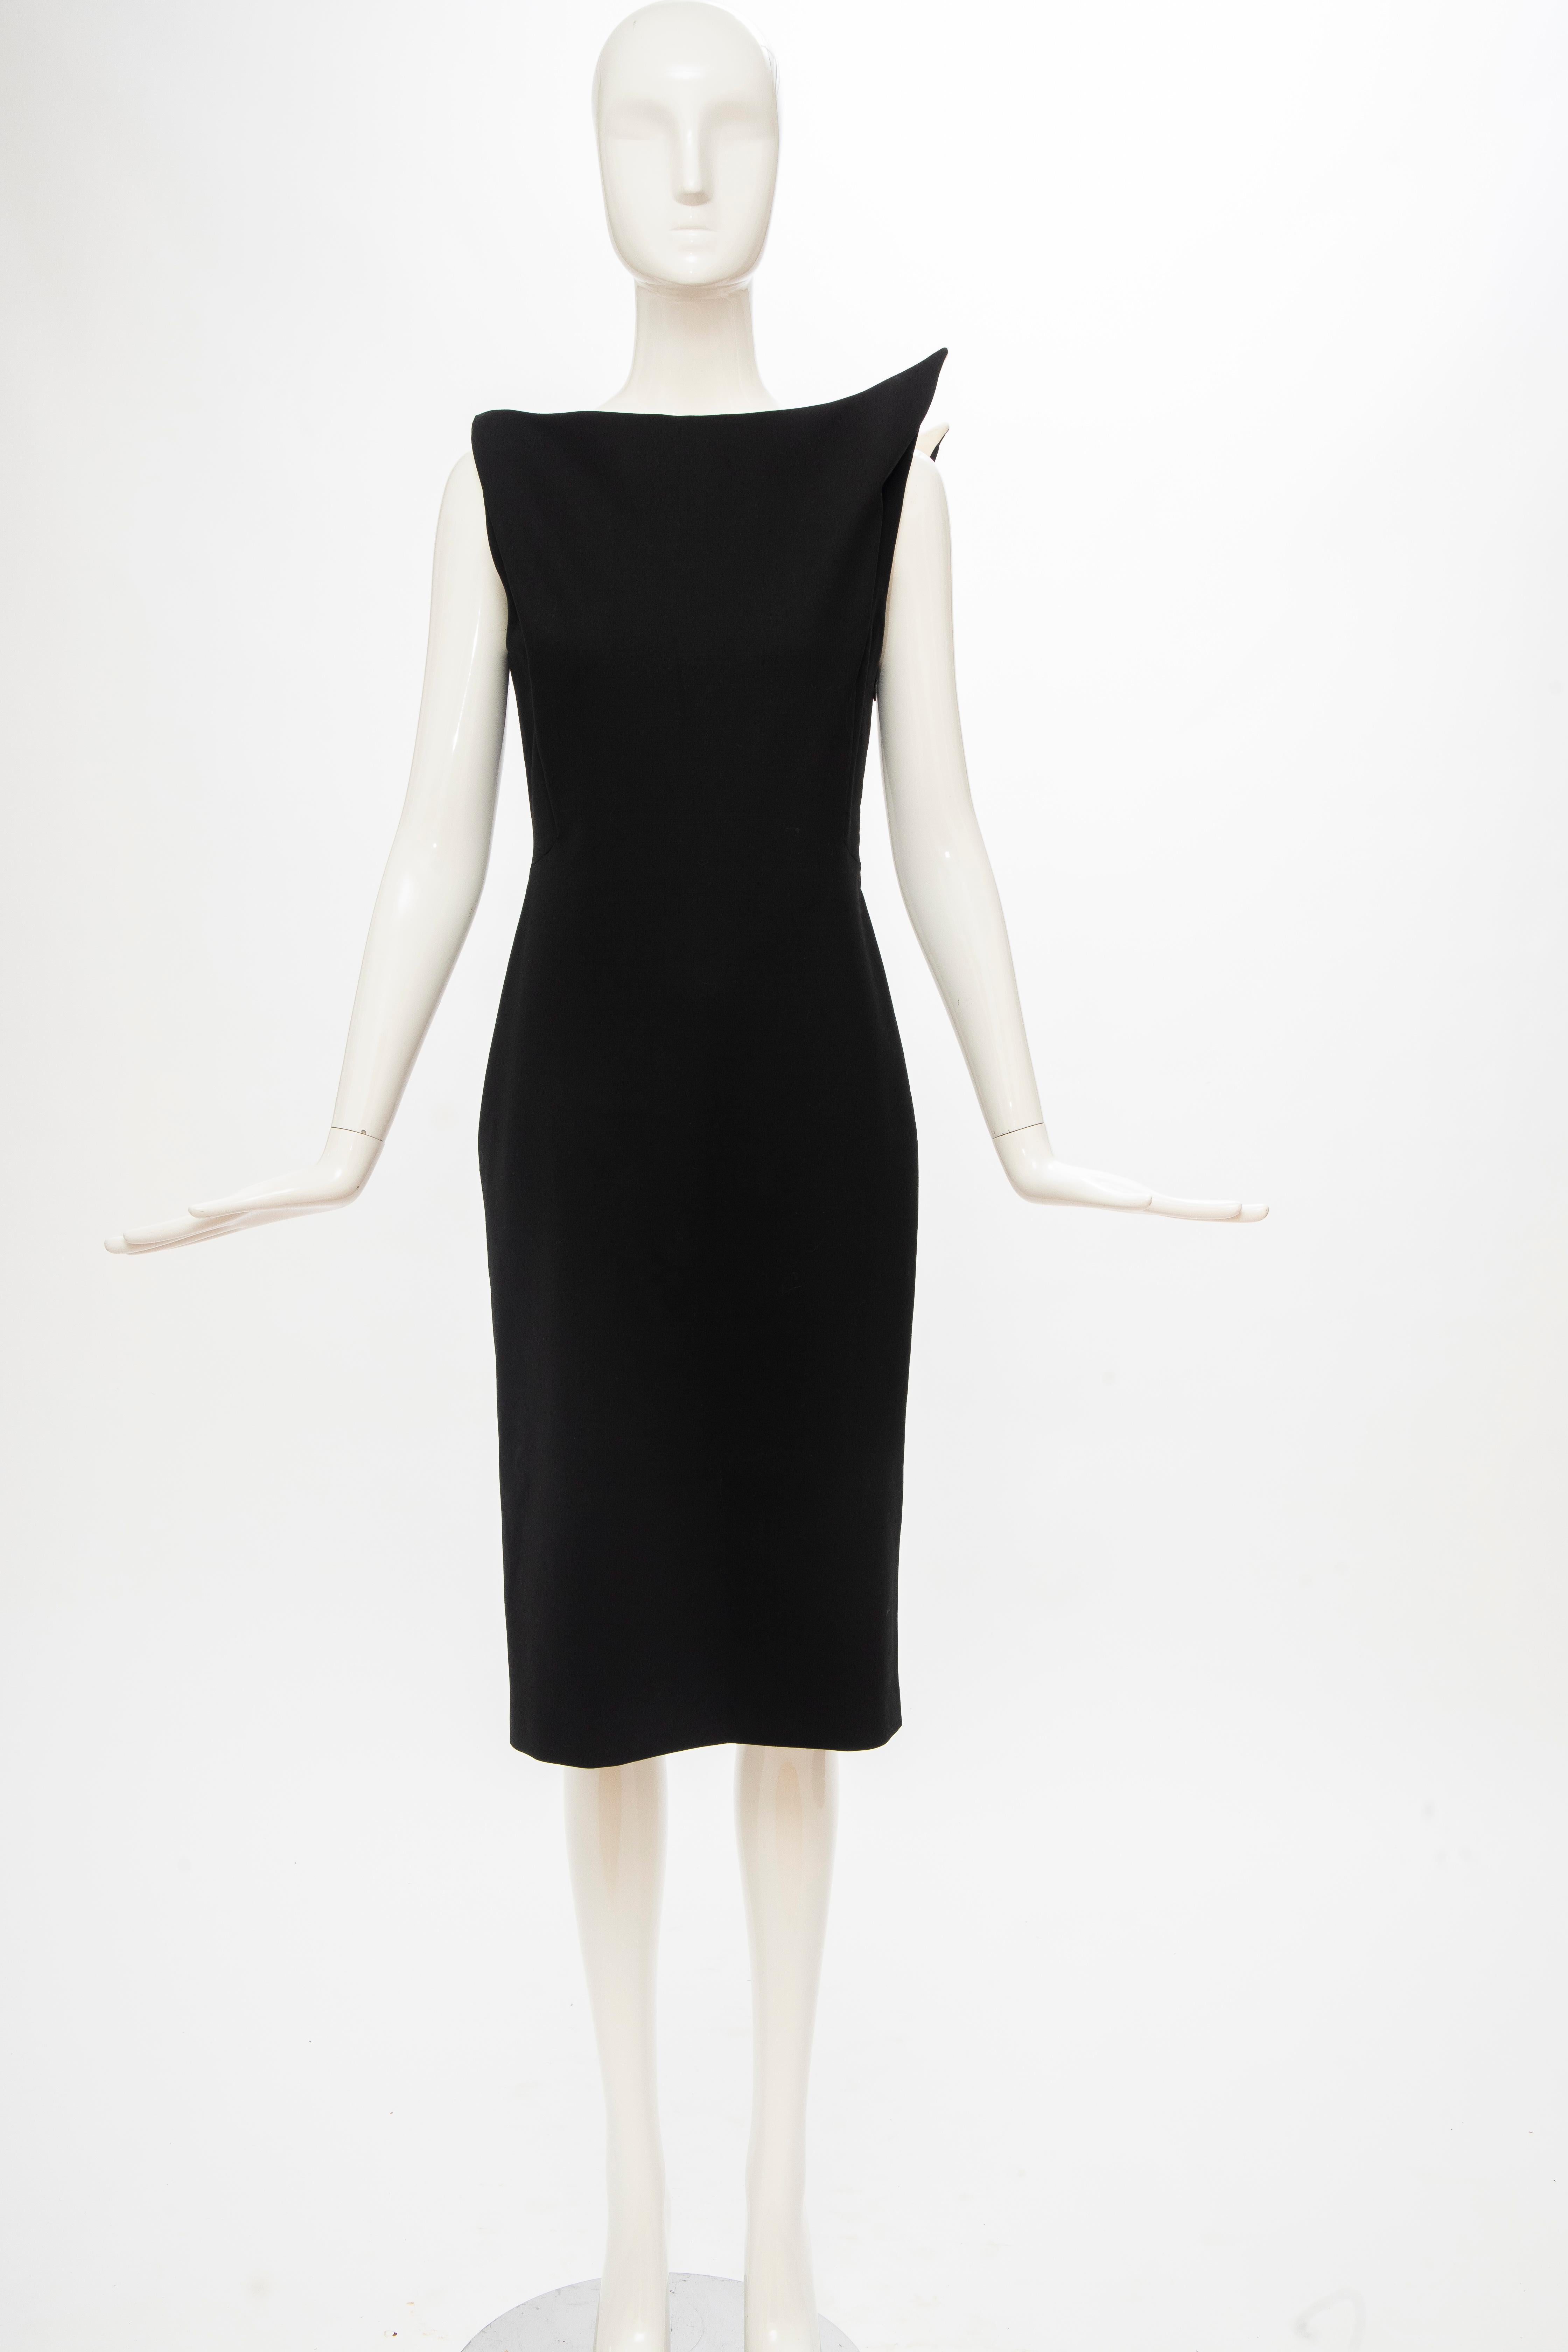 Raf Simons for Jil Sander, Runway Fall 2009, black virgin wool, spandex, sculptural dress with bateau neckline, concealed side zip and hook and eye closure, fully lined. 

Inspired by the mid-century French ceramicist Pol Chambost.

IT. 34, US.